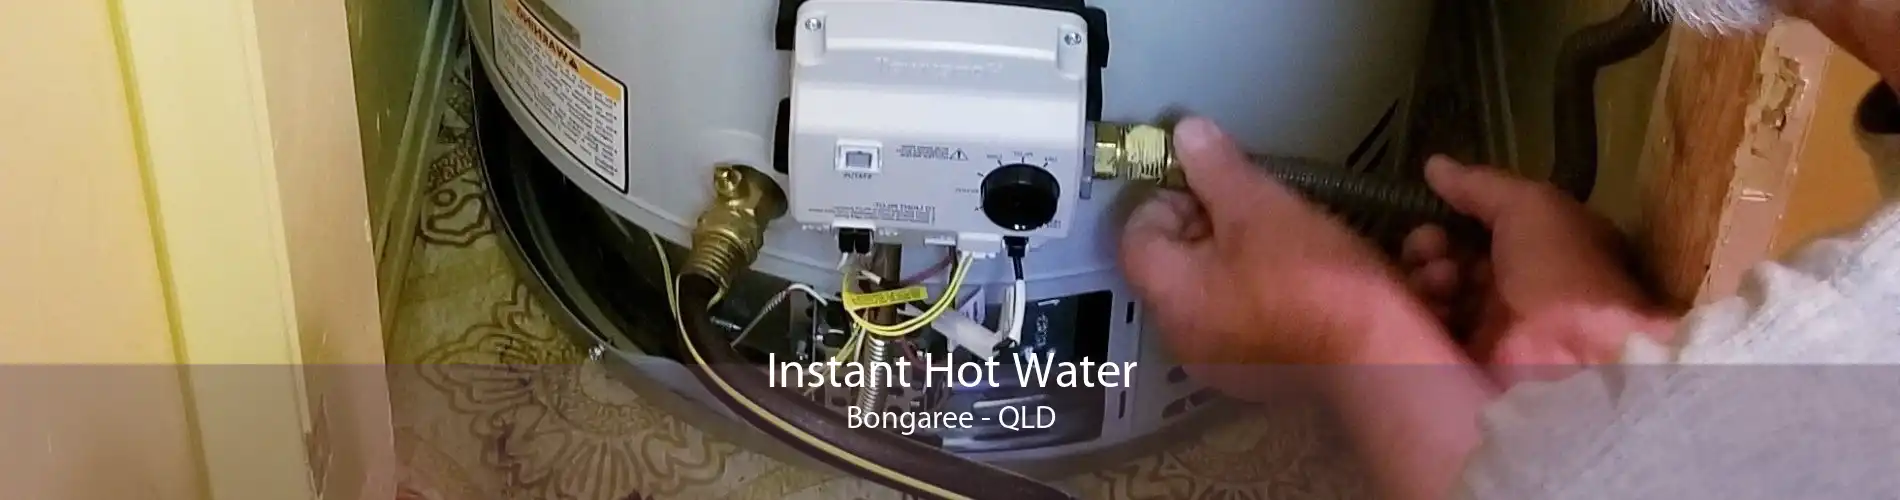 Instant Hot Water Bongaree - QLD